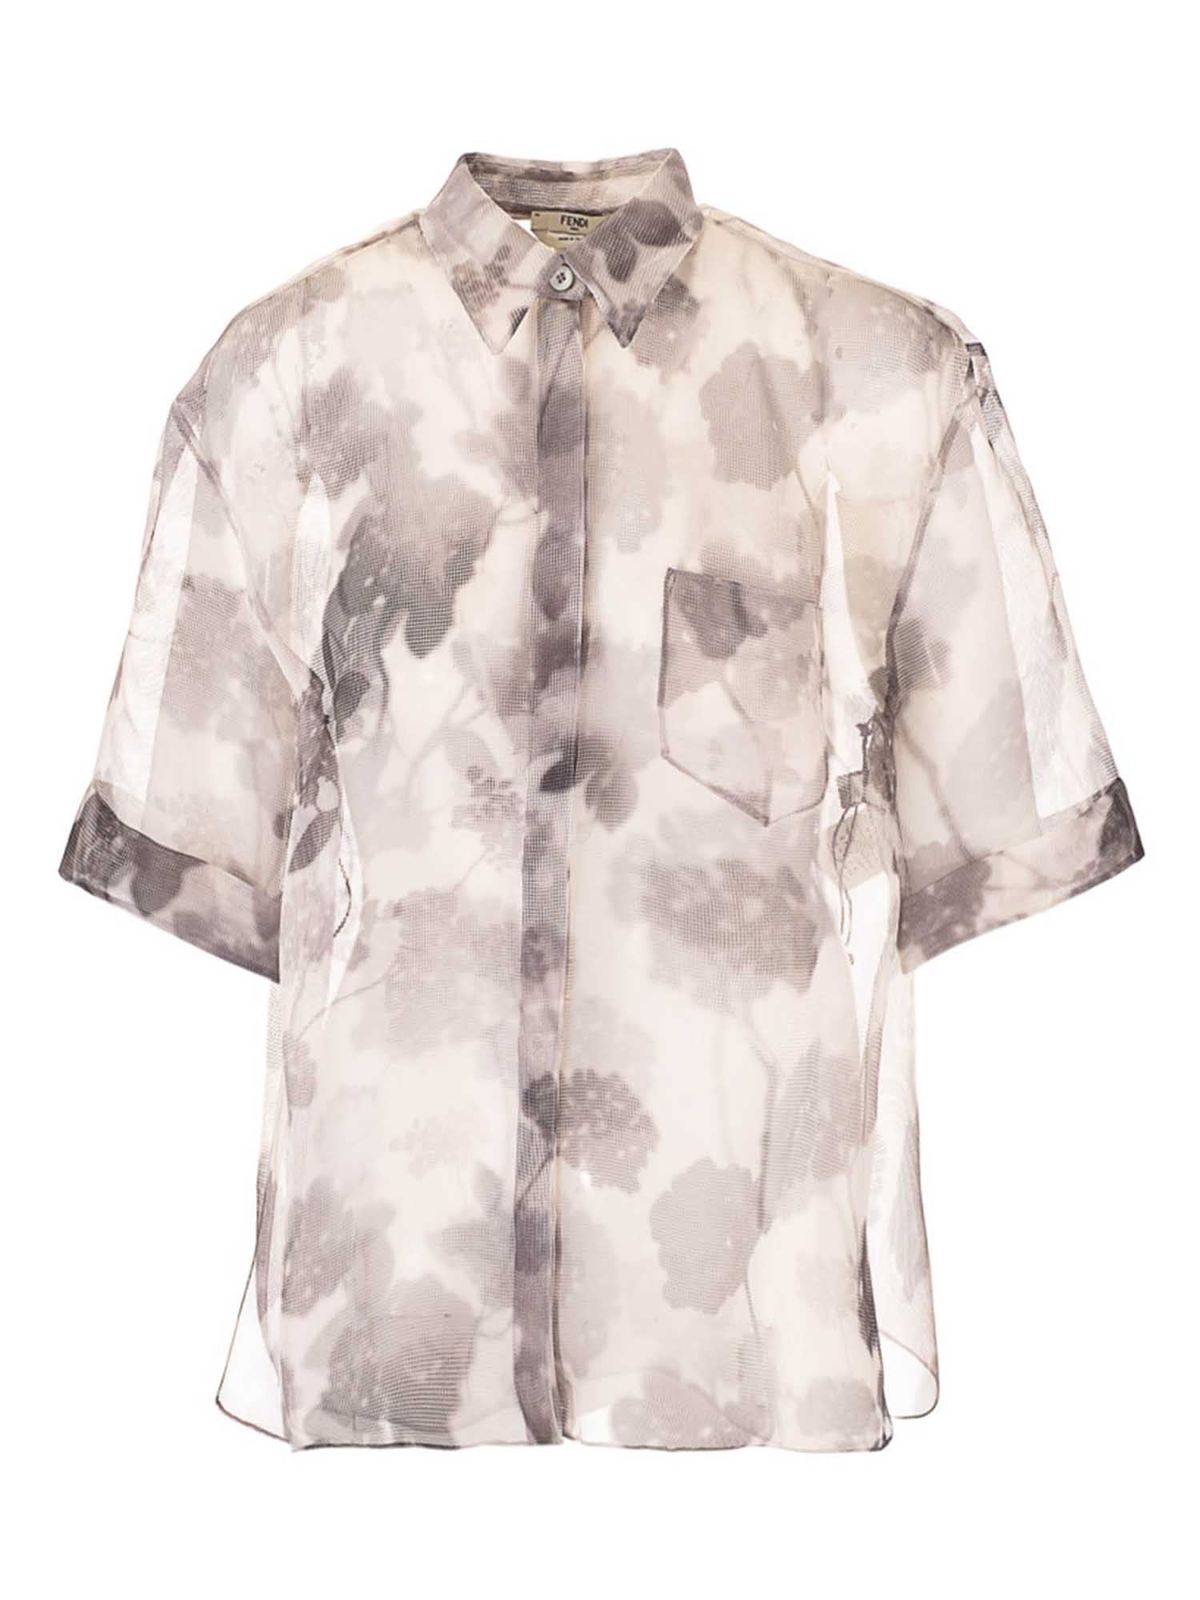 FENDI FLORAL PATTERN SHIRT IN GREY AND WHITE